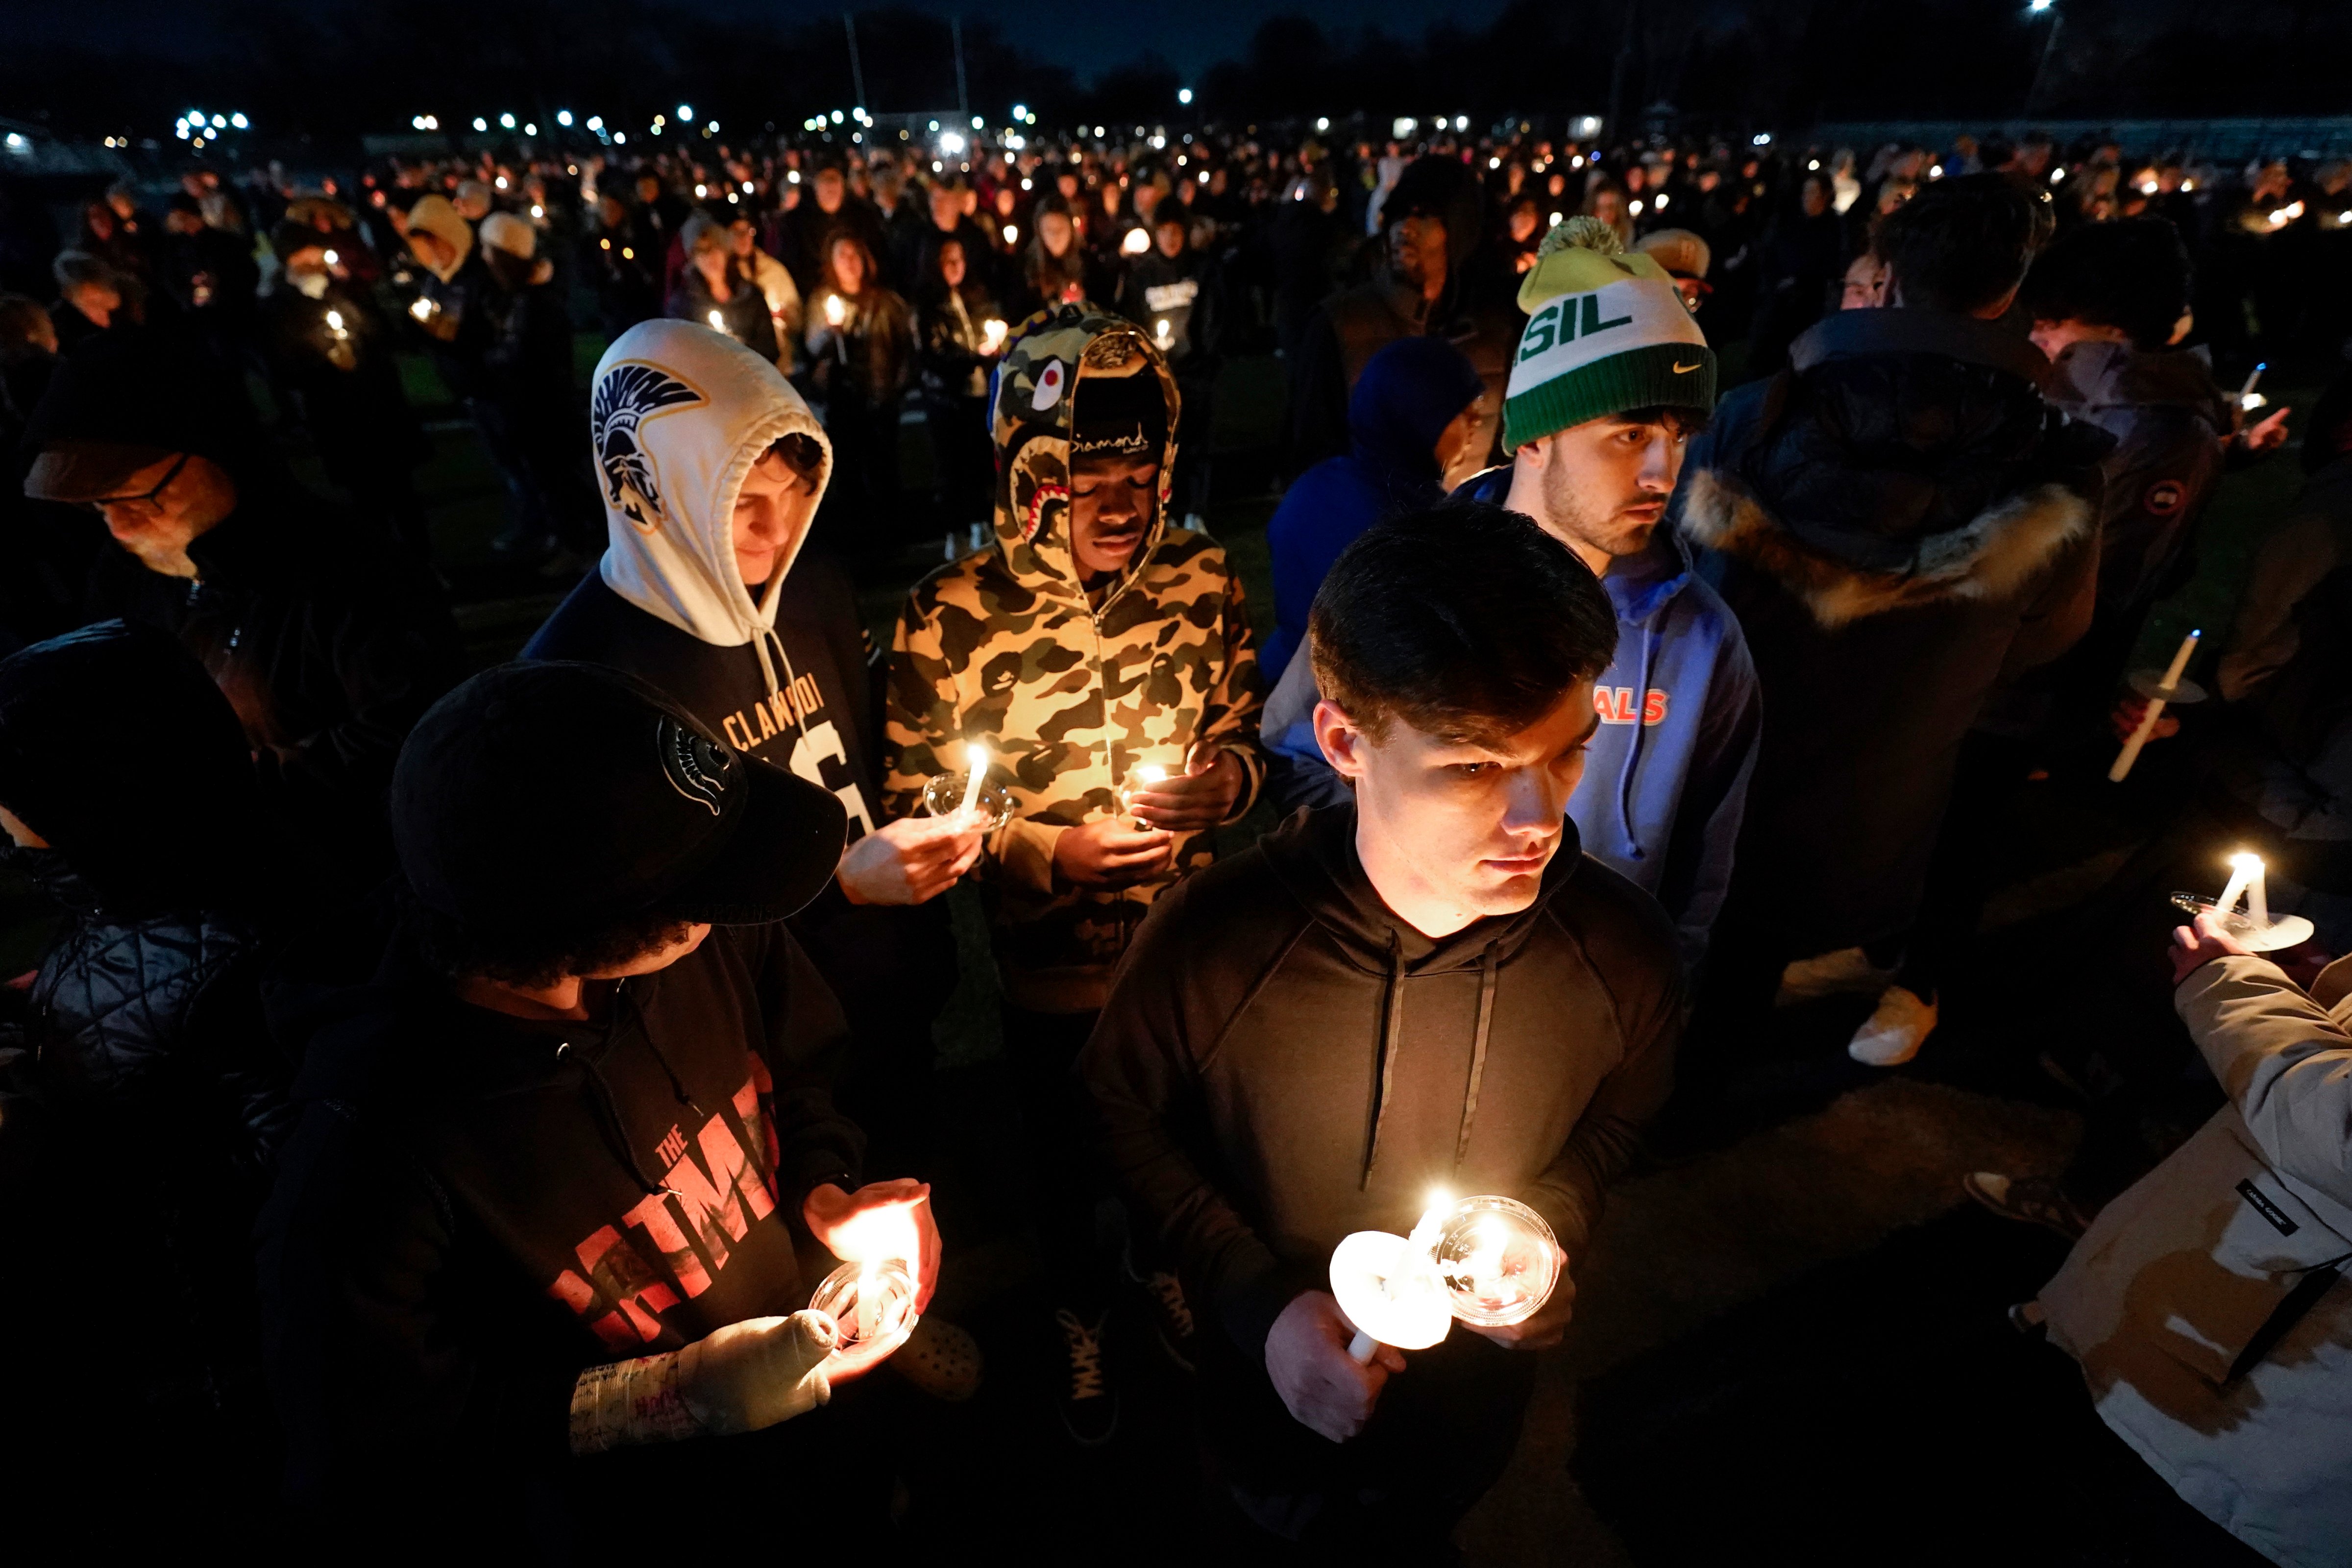 Mourners attend a candlelight vigil for Alexandria Verner, one of the students killed at Michigan State University Monday night, at Clawson High School football field, Tuesday, Feb. 14, 2023. (Paul Sancya—AP)